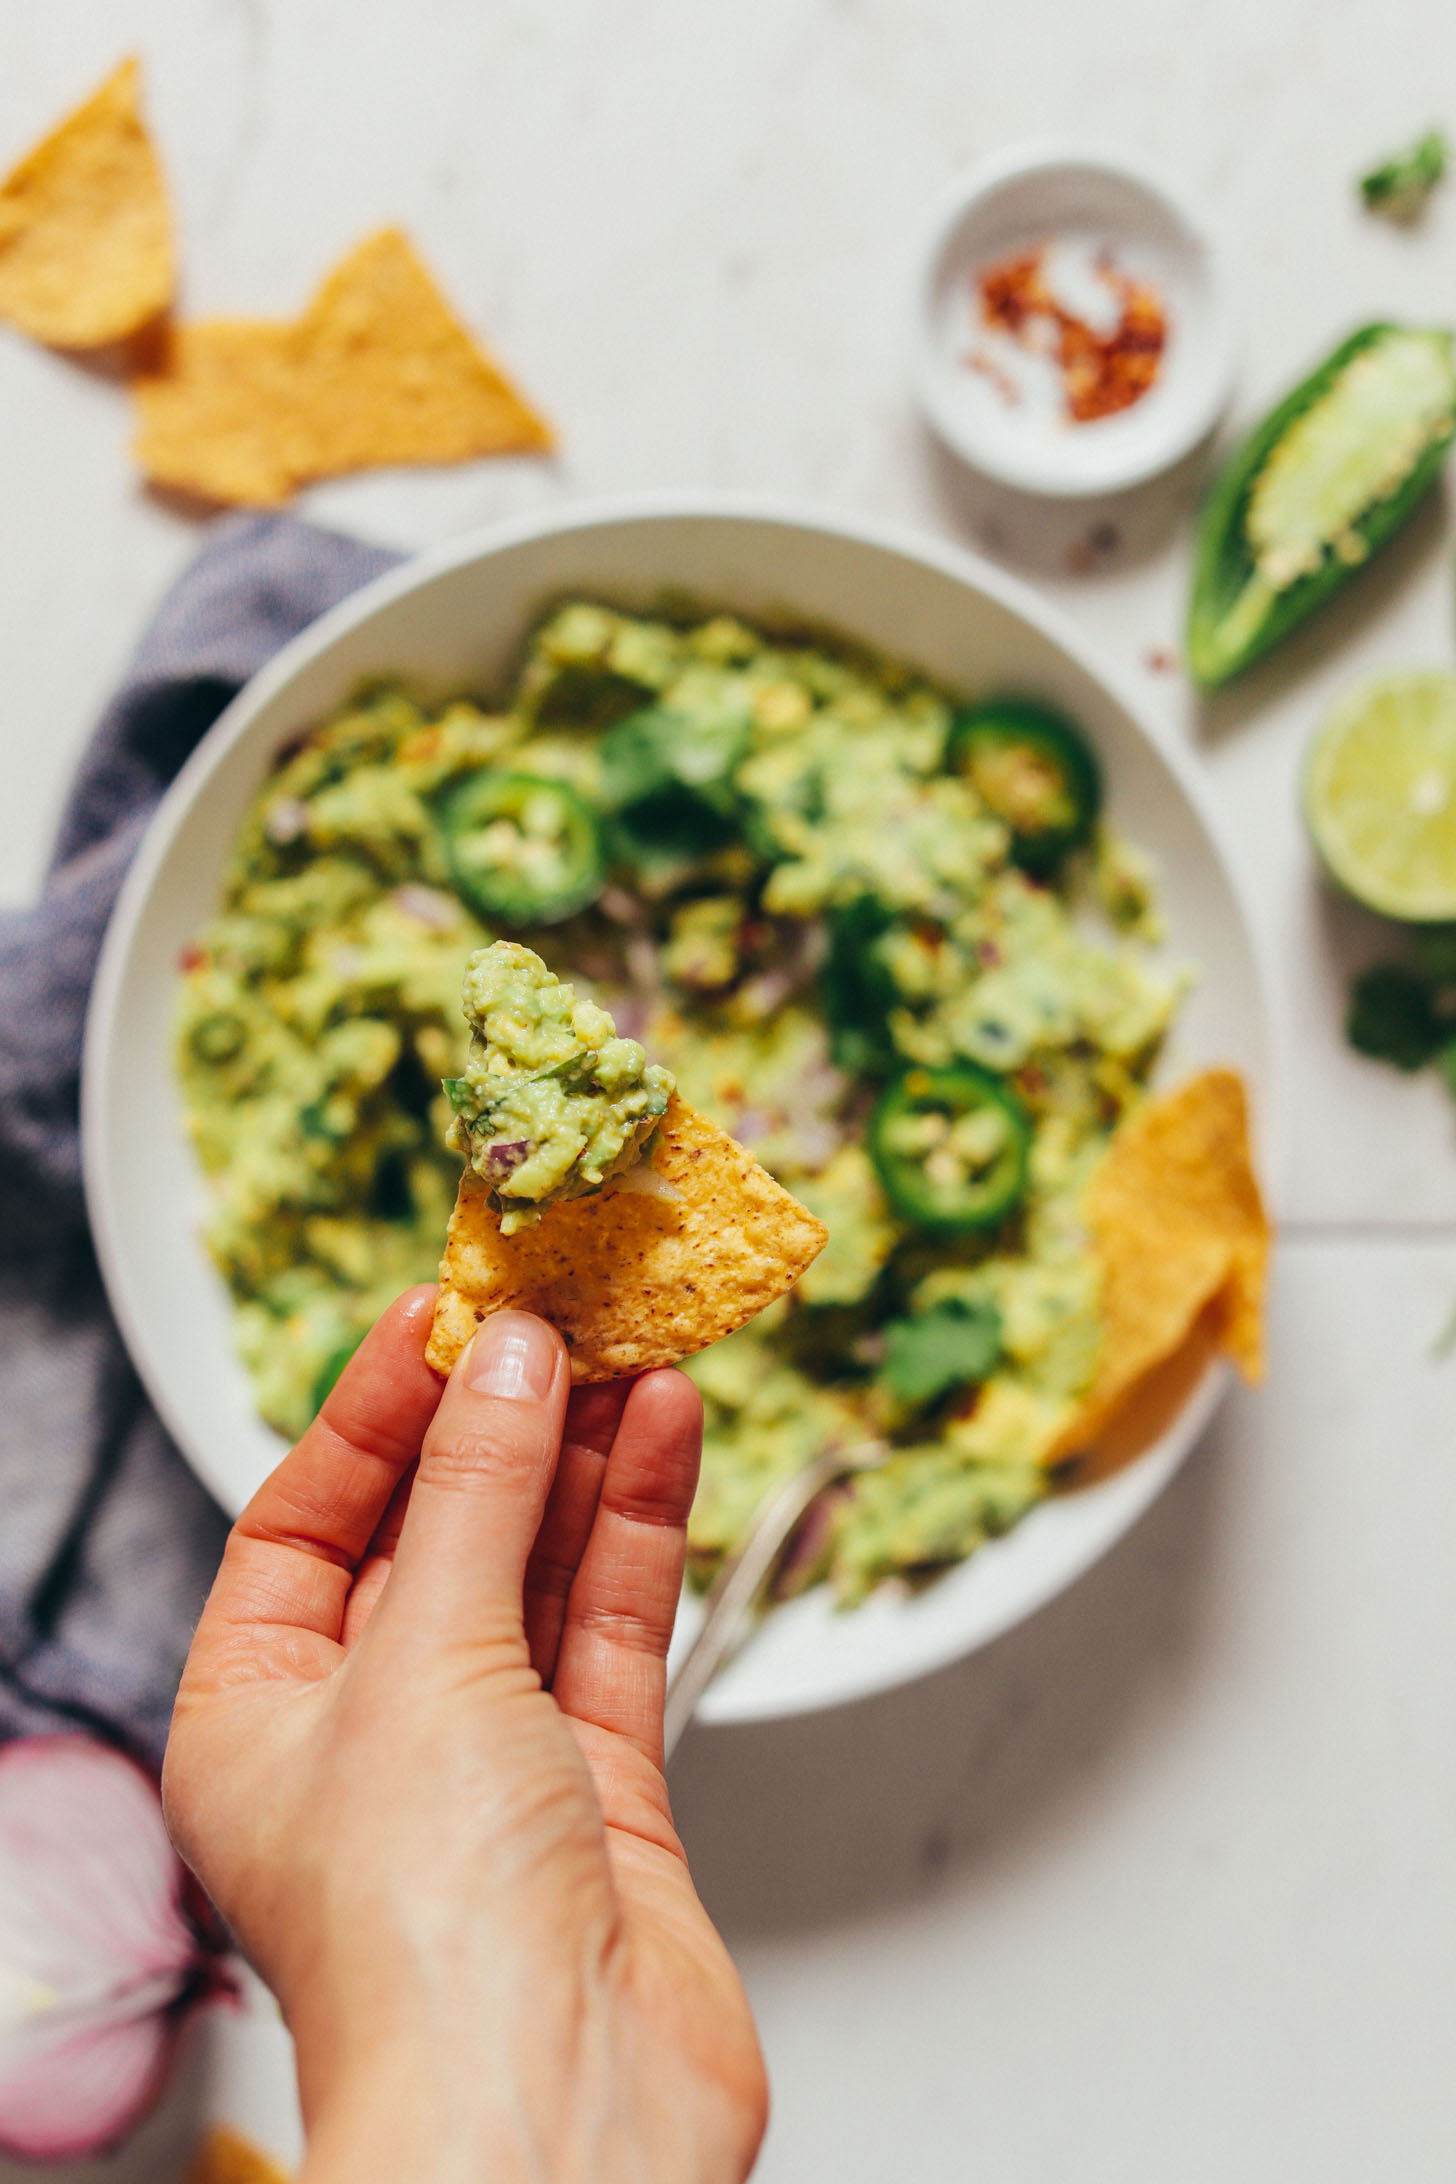 An overhead image of guacamole in a white bowl in the background with a hand holding a chip with some guacamole in focus overhead